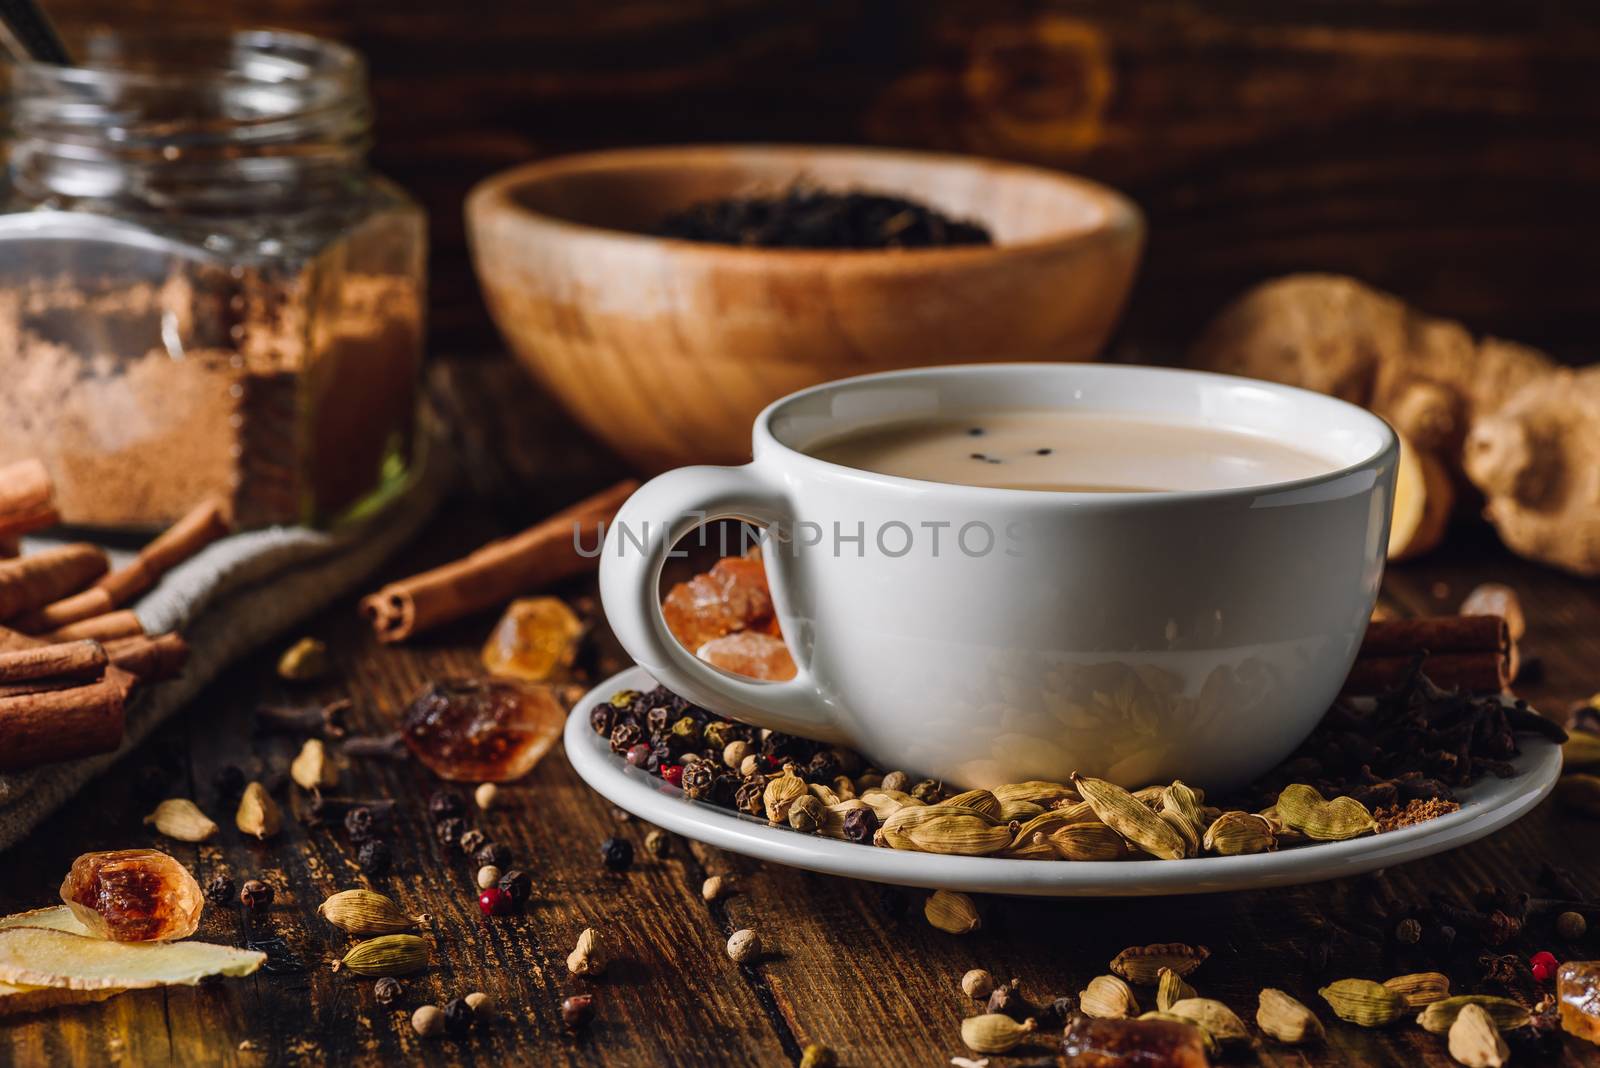 Masala Chai in White Cup with Different Spices on Wooden Table